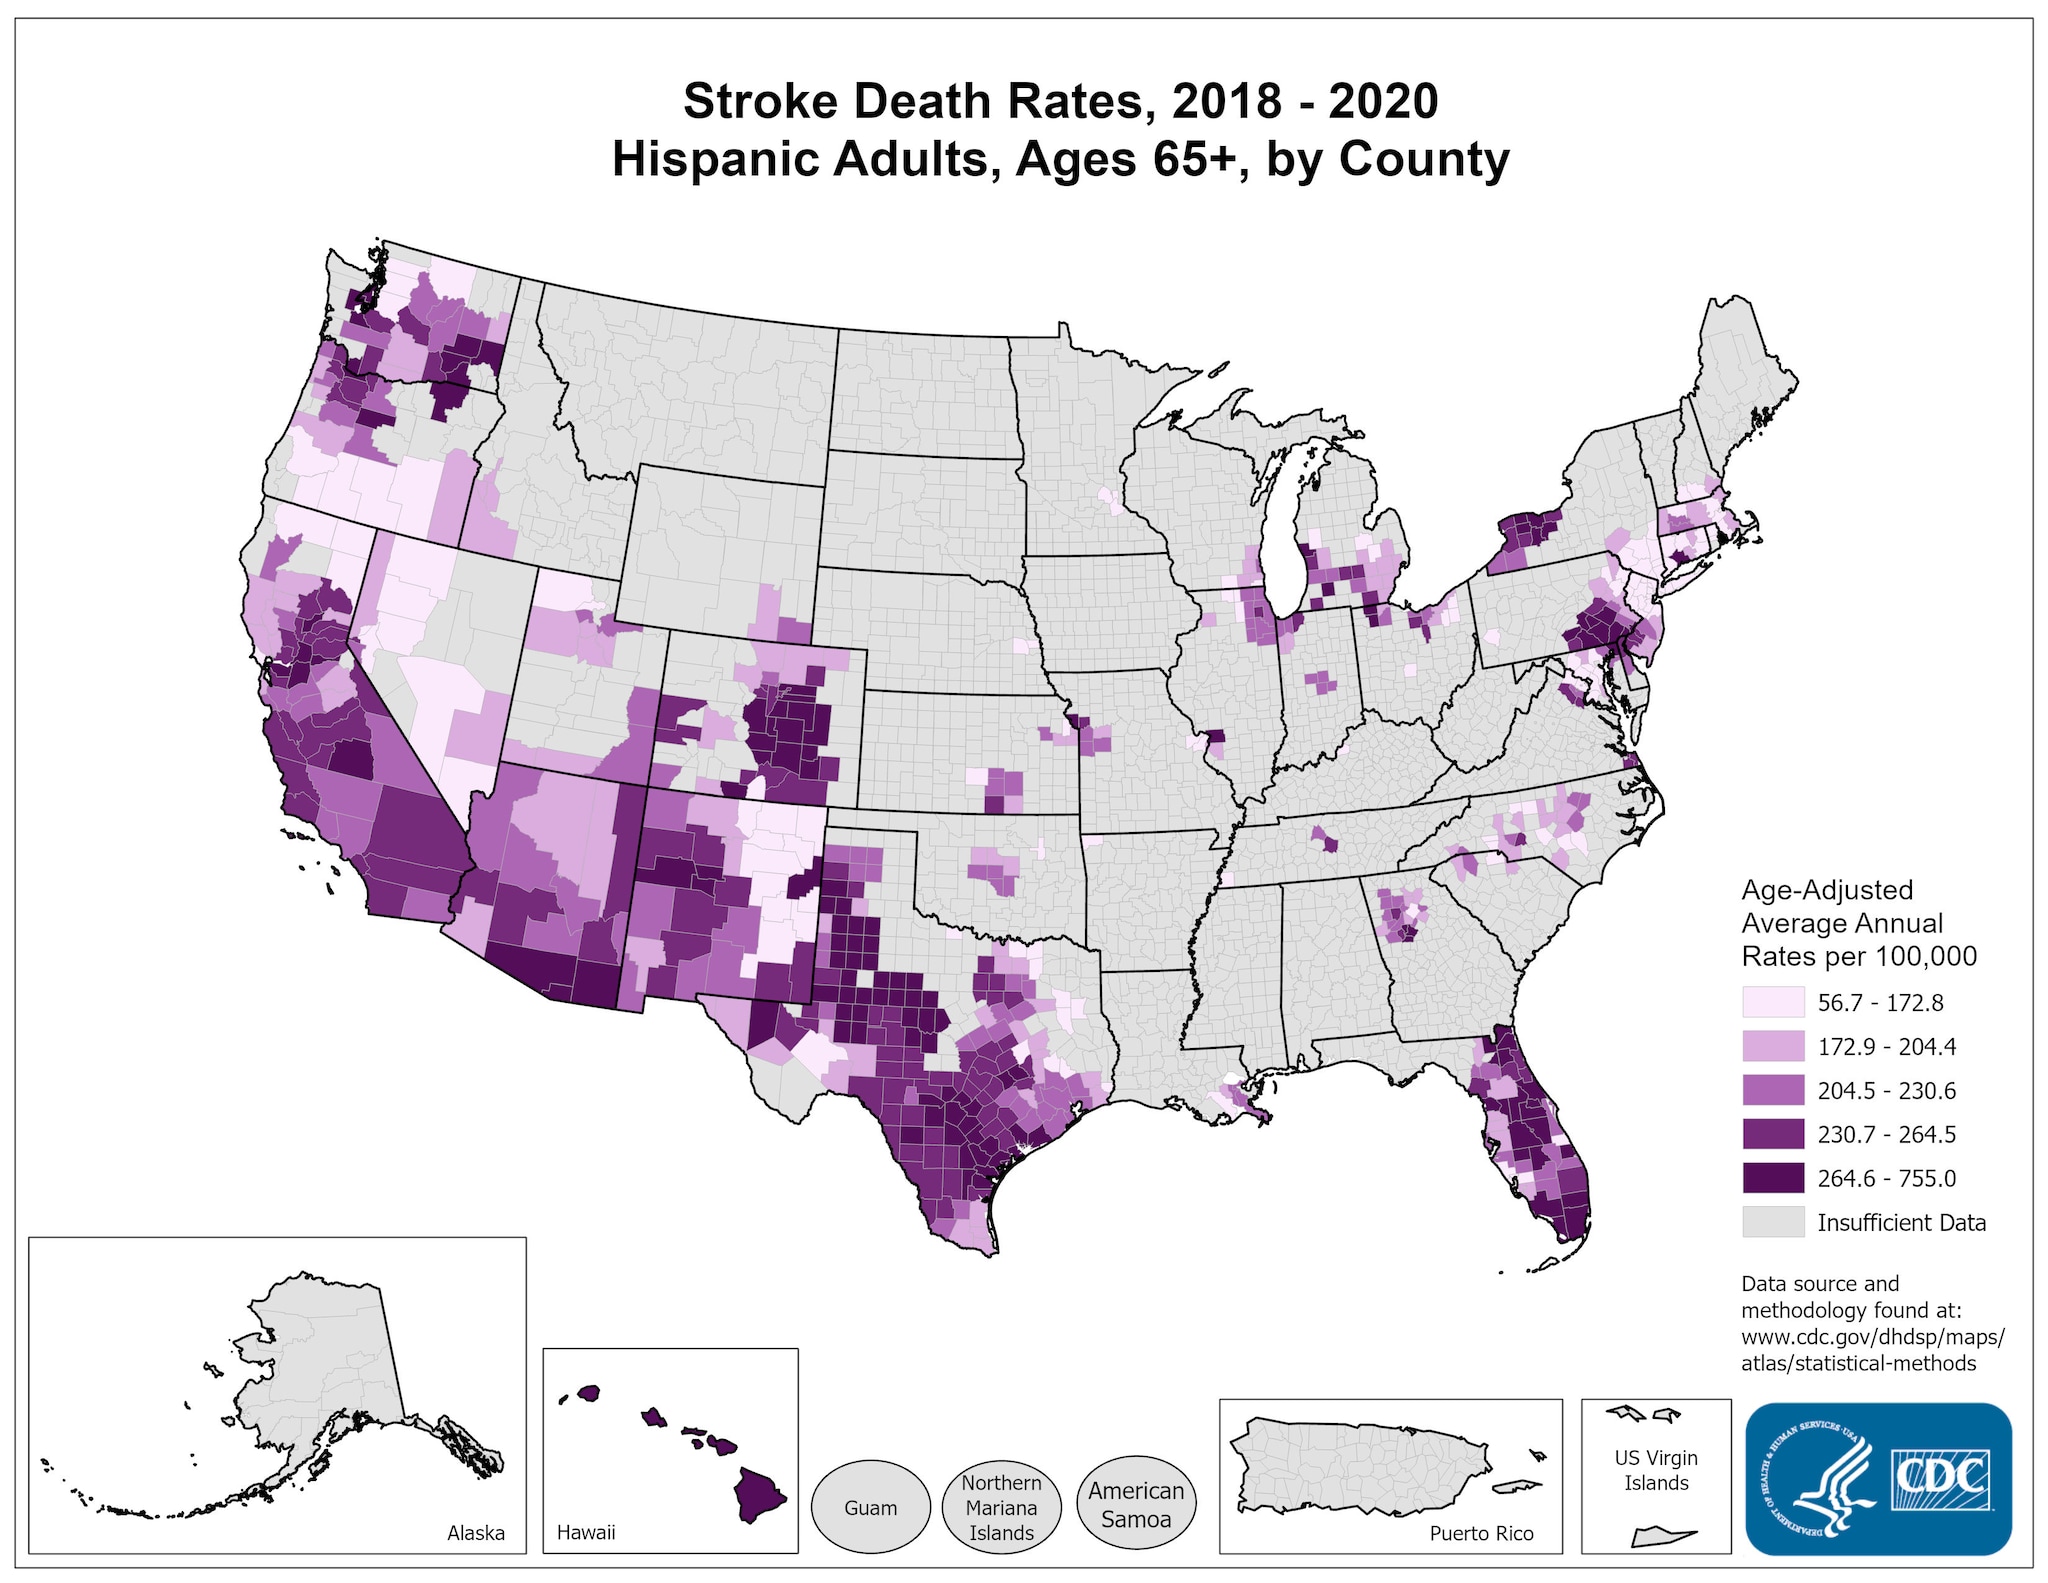 Stroke Death Rates for 2018 through 2020 for Hispanics Aged 65 Years and Older by County